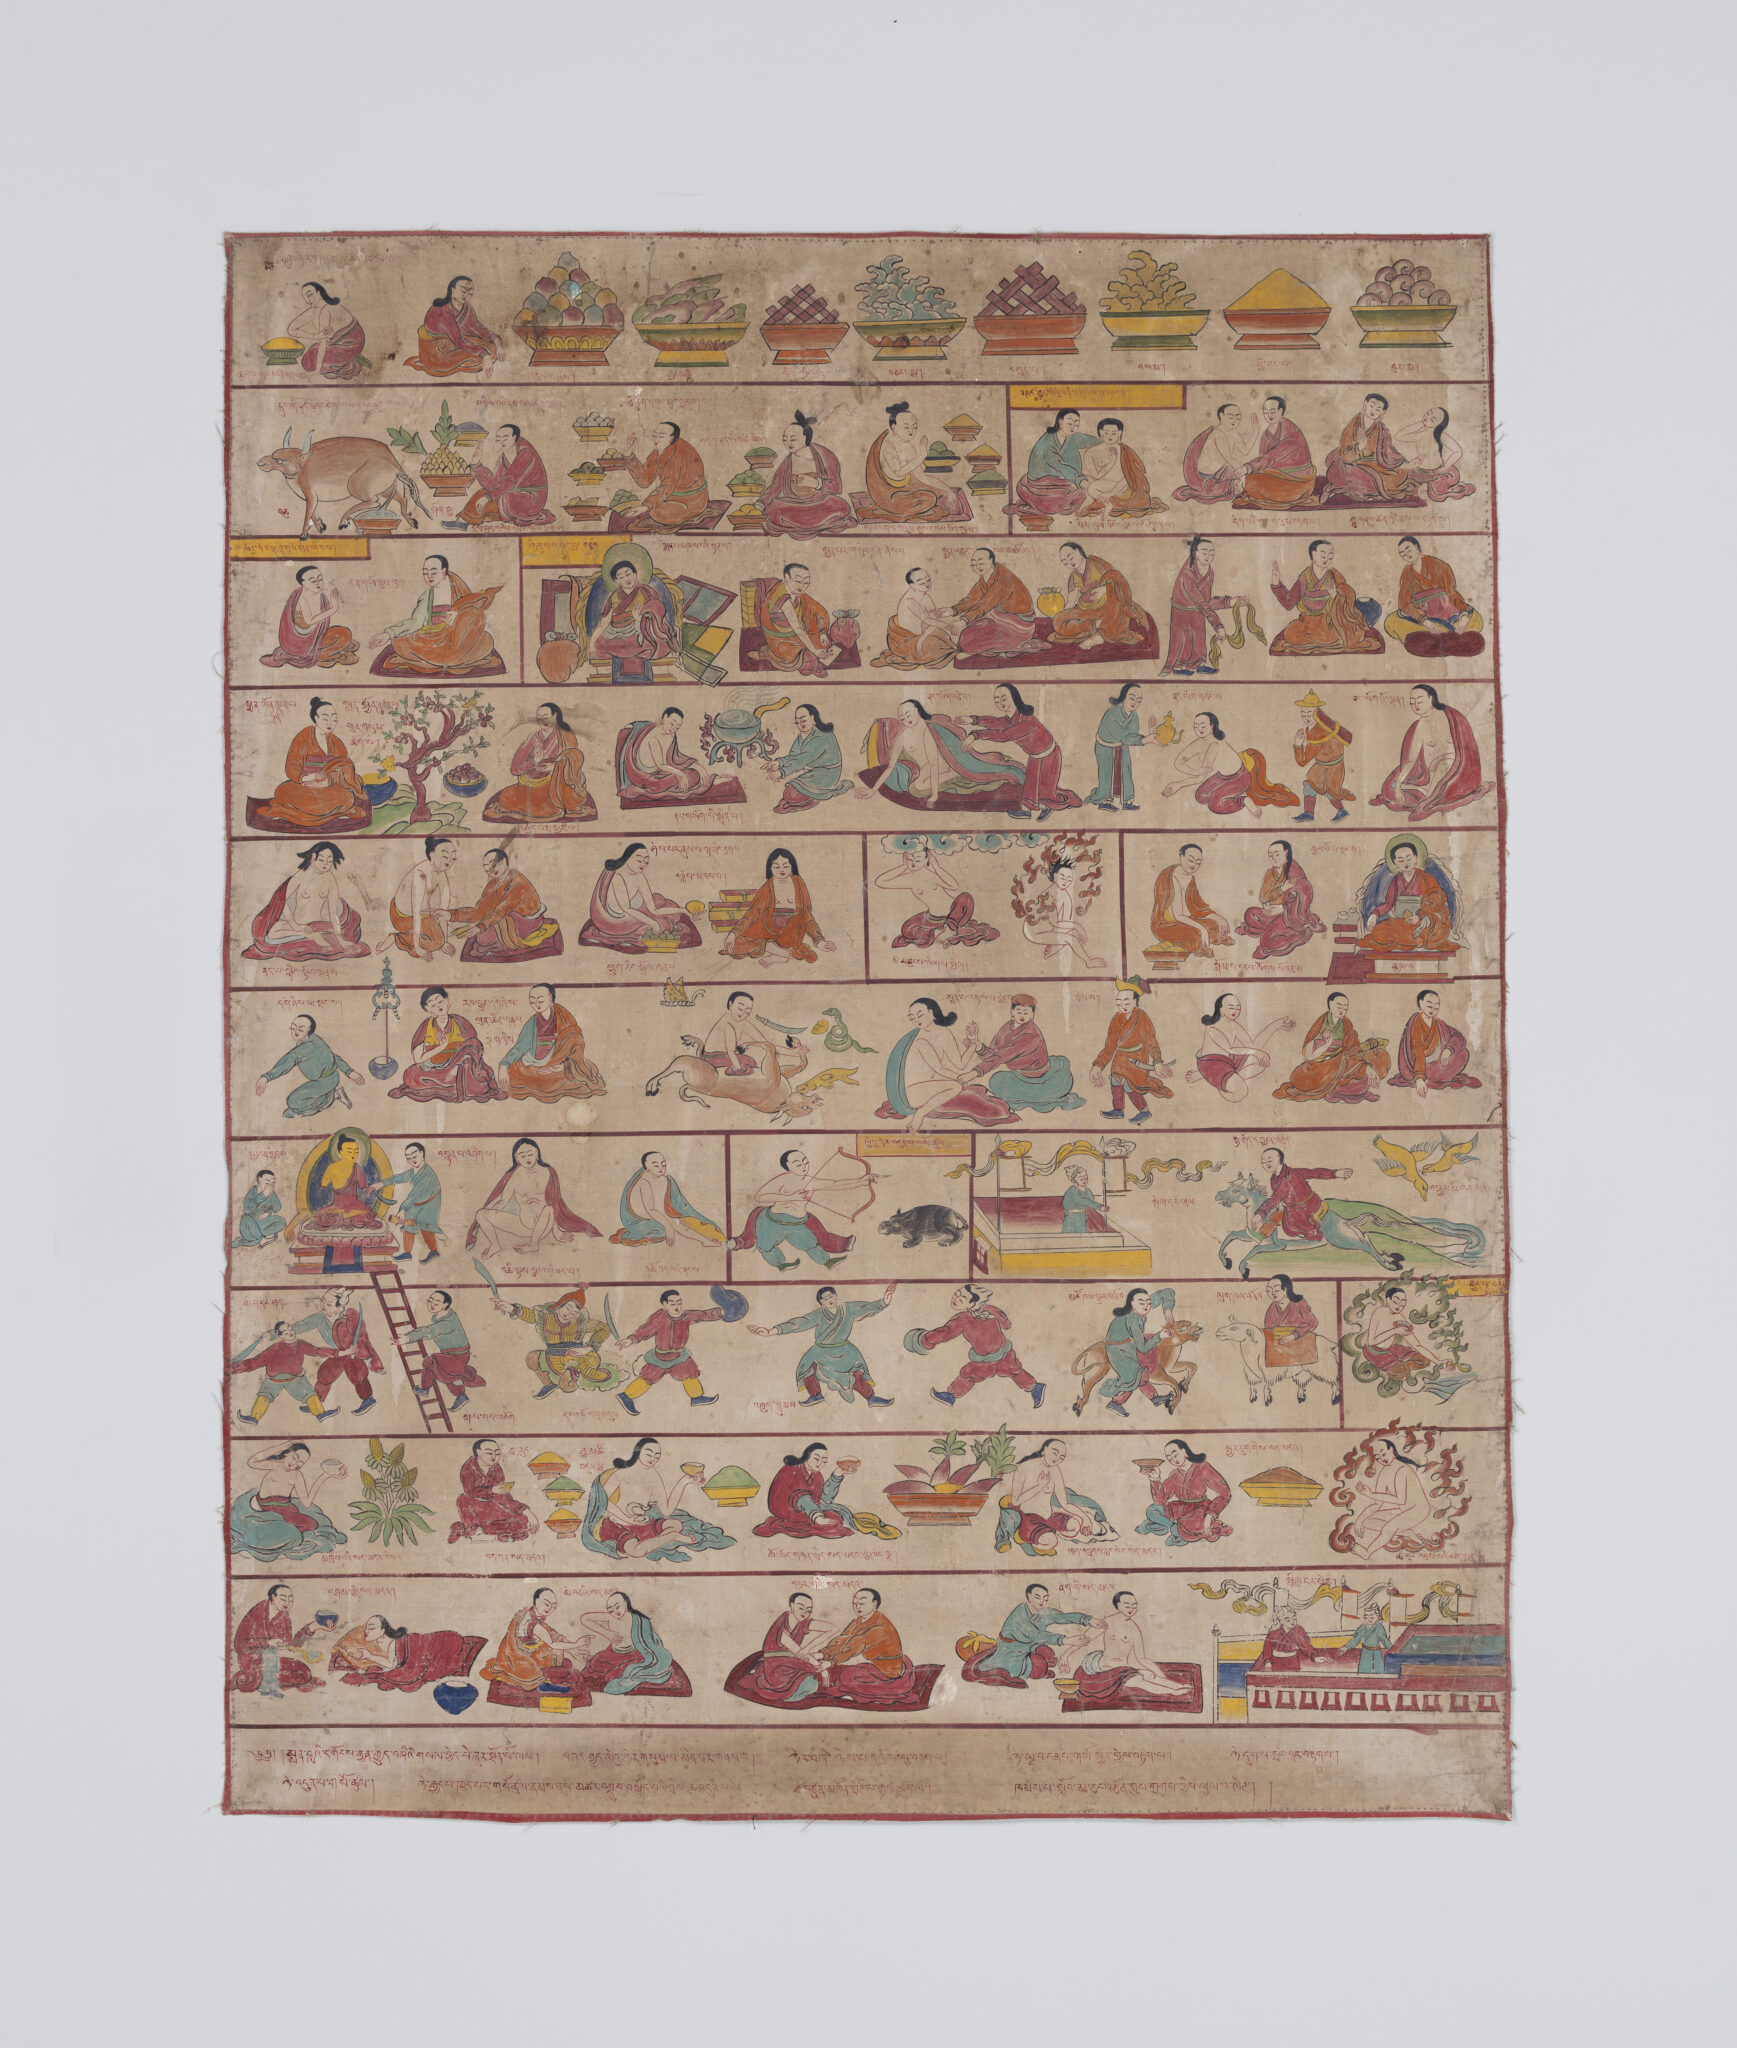 Medical chart featuring scenes arranged in registers divided into cells depicting patients in conversation with doctors